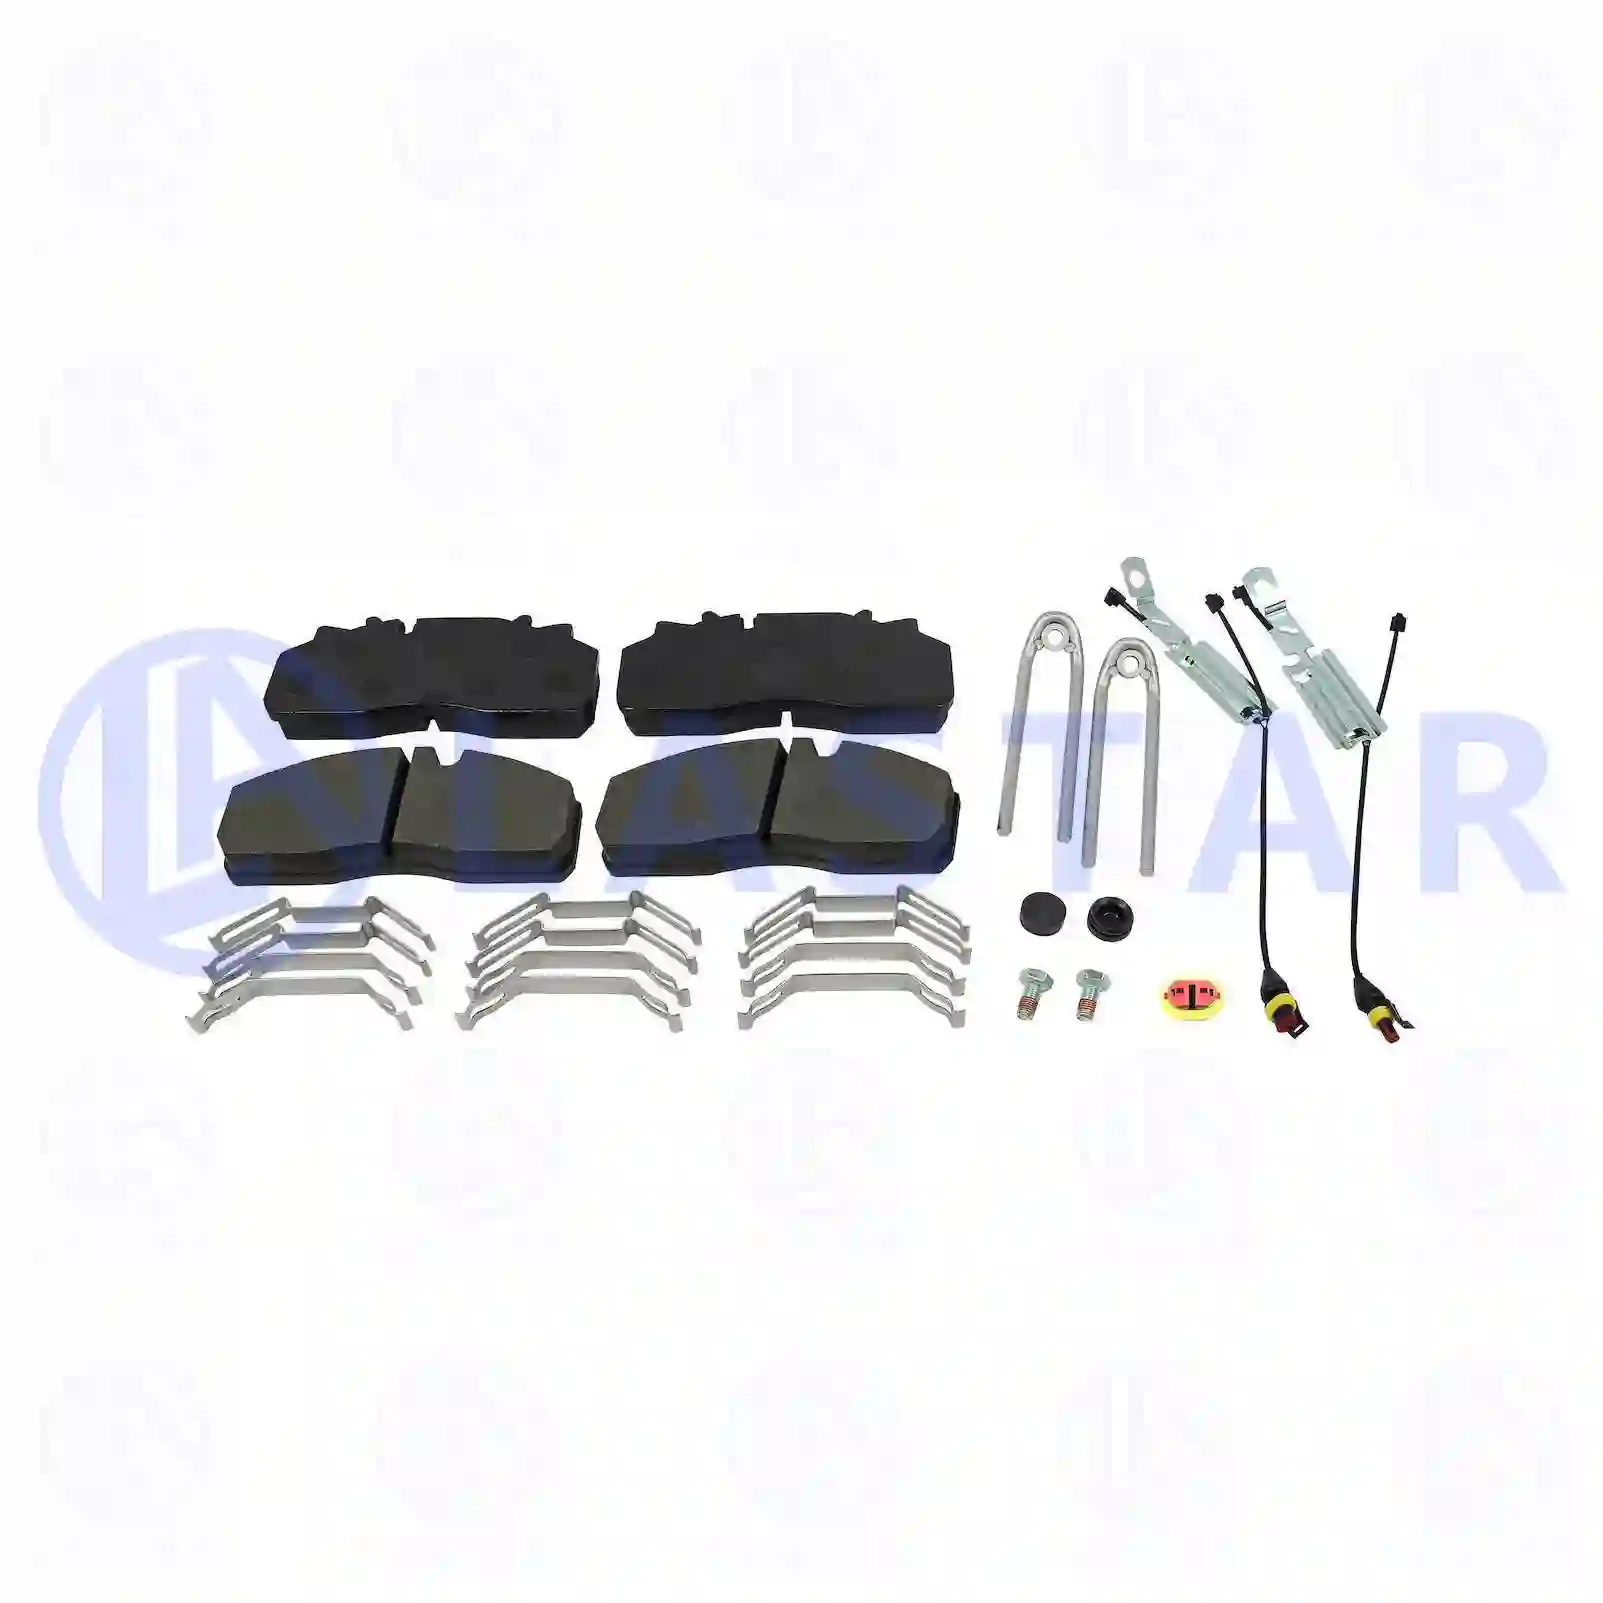 Disc brake pad kit, with wear indicators, 77713641, 1534099, 1628064, 1962585, 908138, 5001863324, 12182192, 30570080000, ZG50439-0008 ||  77713641 Lastar Spare Part | Truck Spare Parts, Auotomotive Spare Parts Disc brake pad kit, with wear indicators, 77713641, 1534099, 1628064, 1962585, 908138, 5001863324, 12182192, 30570080000, ZG50439-0008 ||  77713641 Lastar Spare Part | Truck Spare Parts, Auotomotive Spare Parts